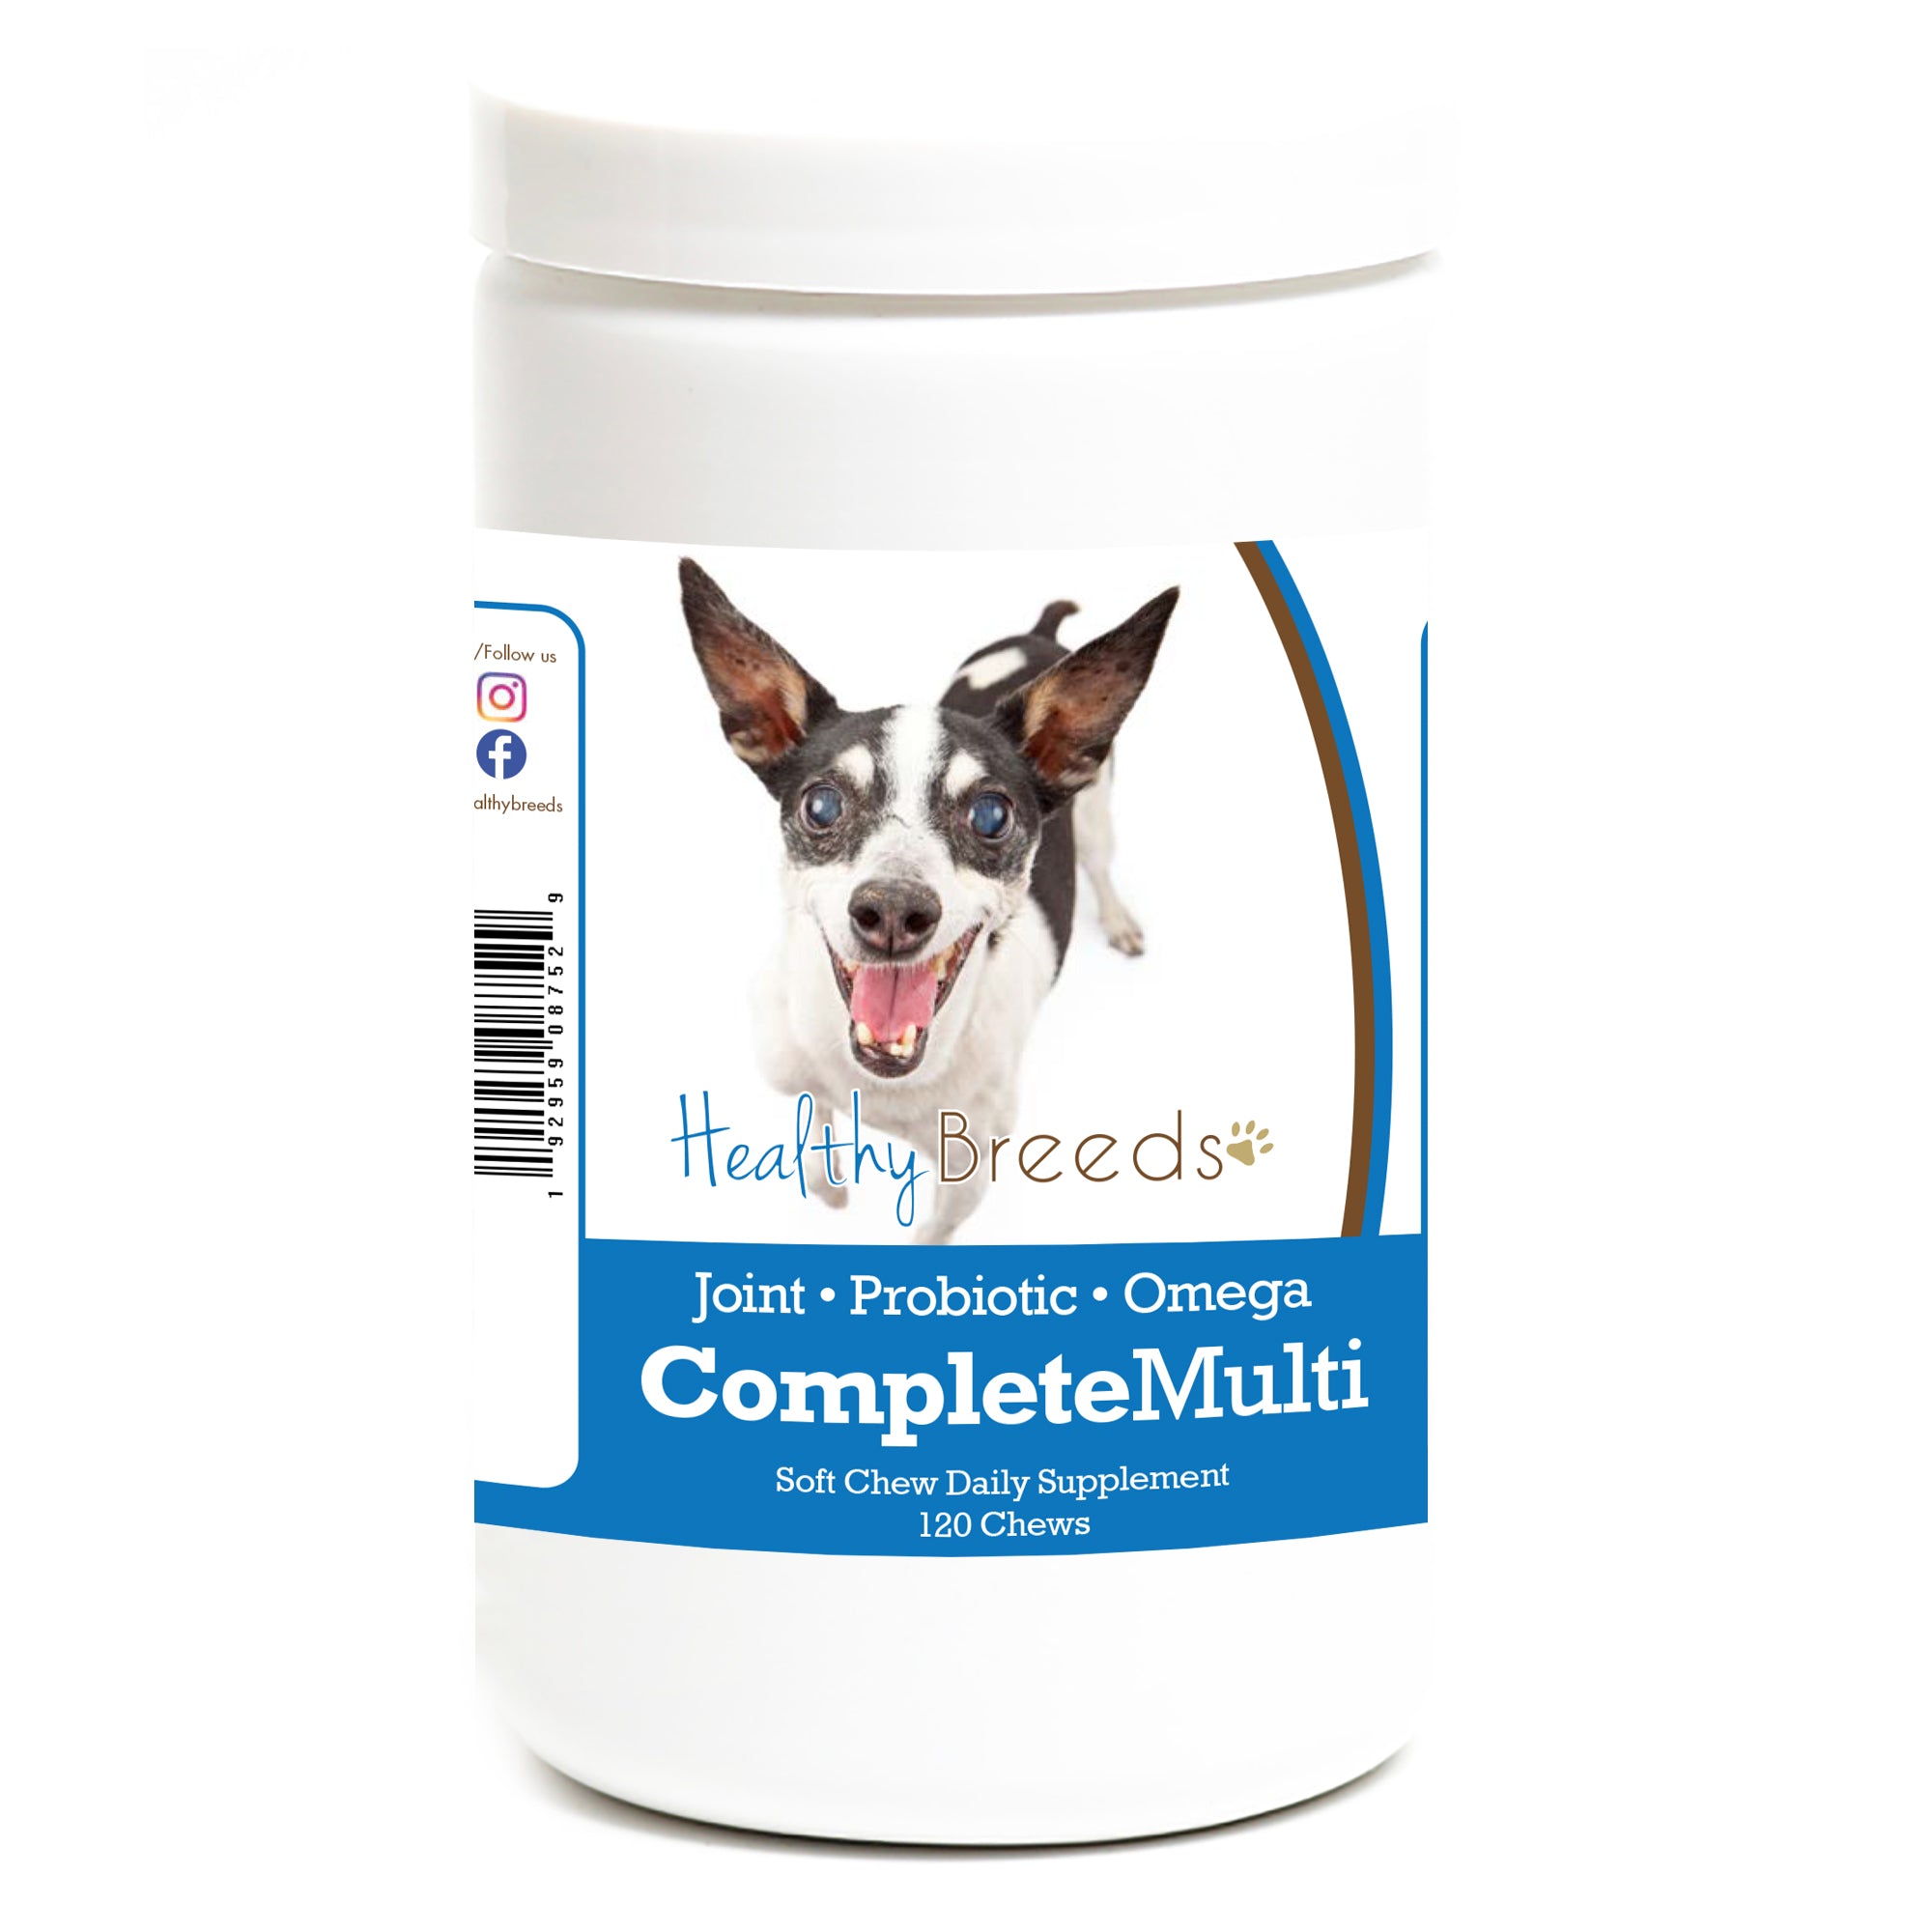 Rat Terrier All In One Multivitamin Soft Chew 120 Count